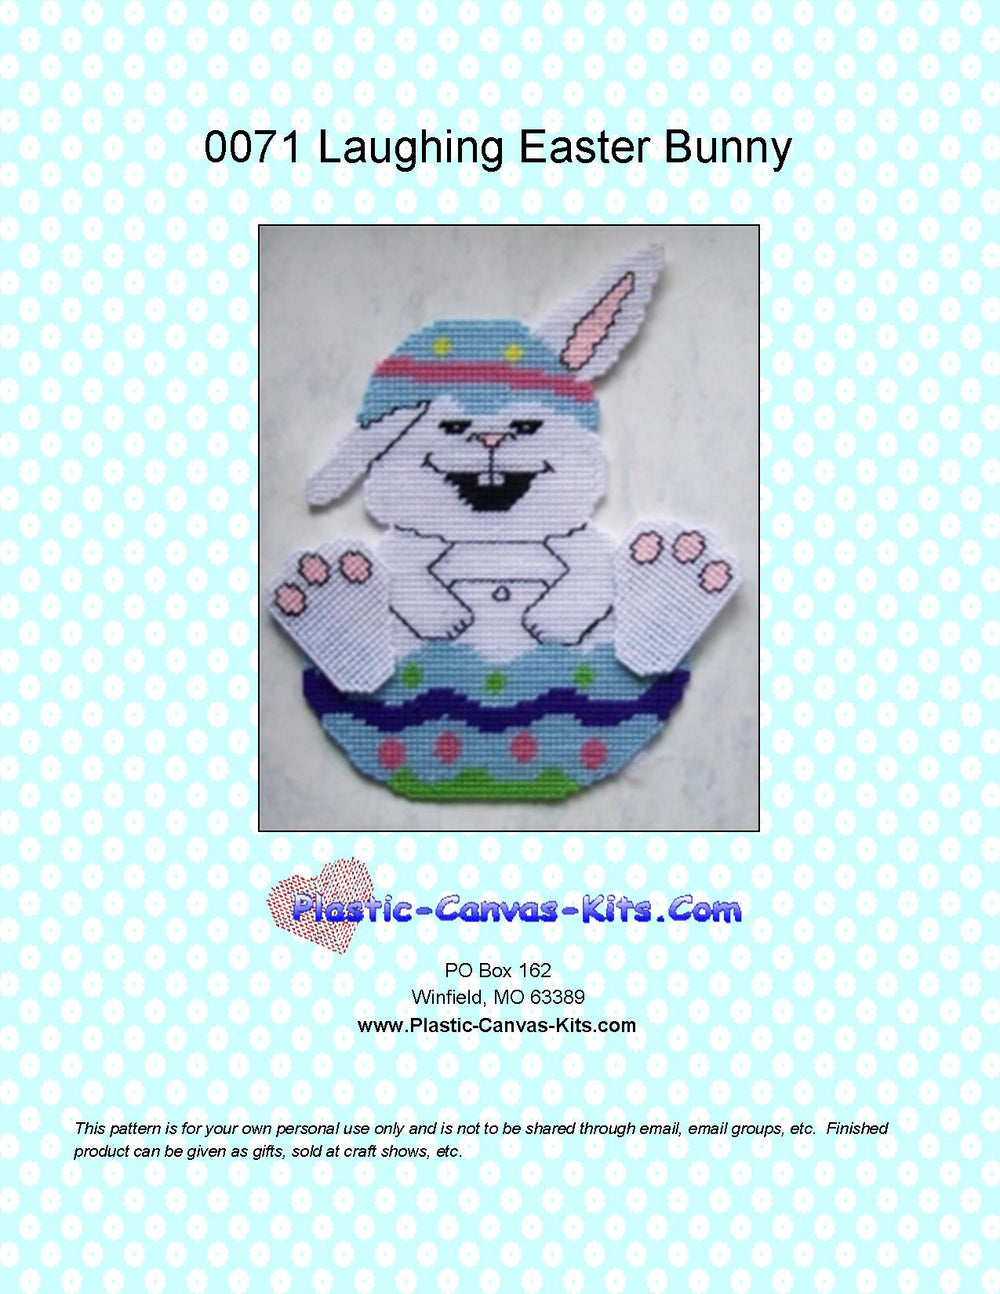 Laughing Easter Bunny in Egg